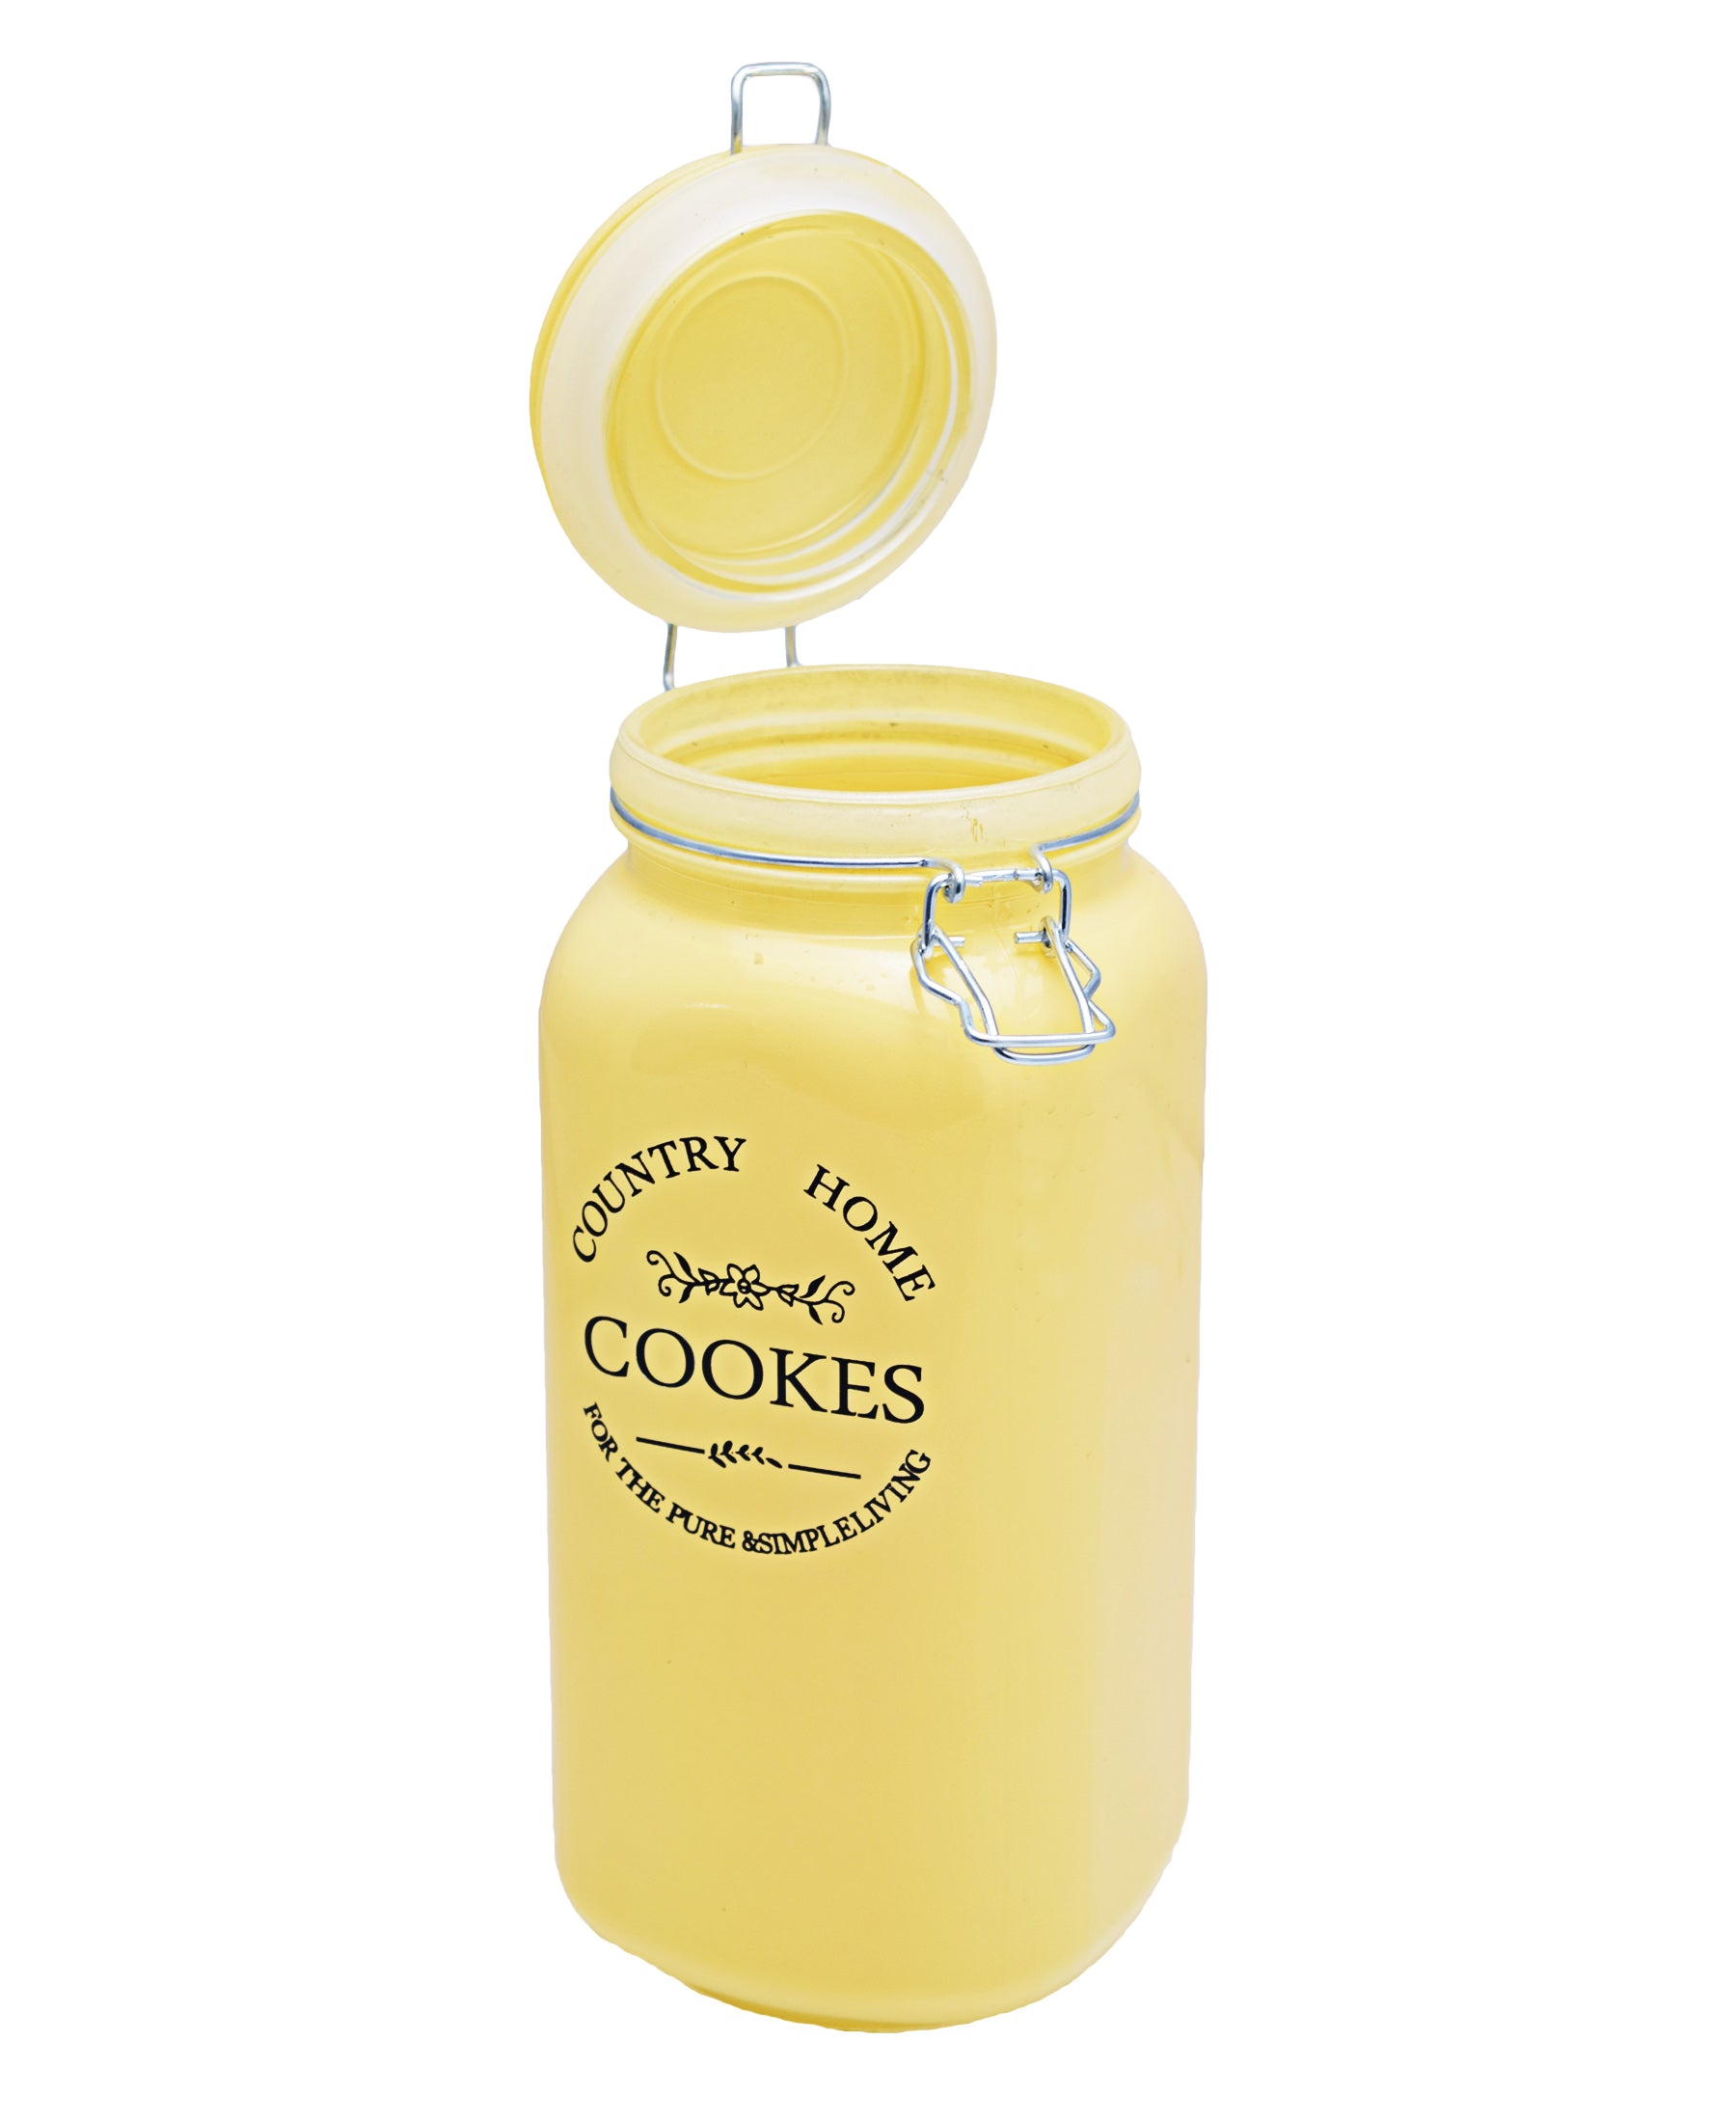 Country Home Cookies Large Jar - Cream